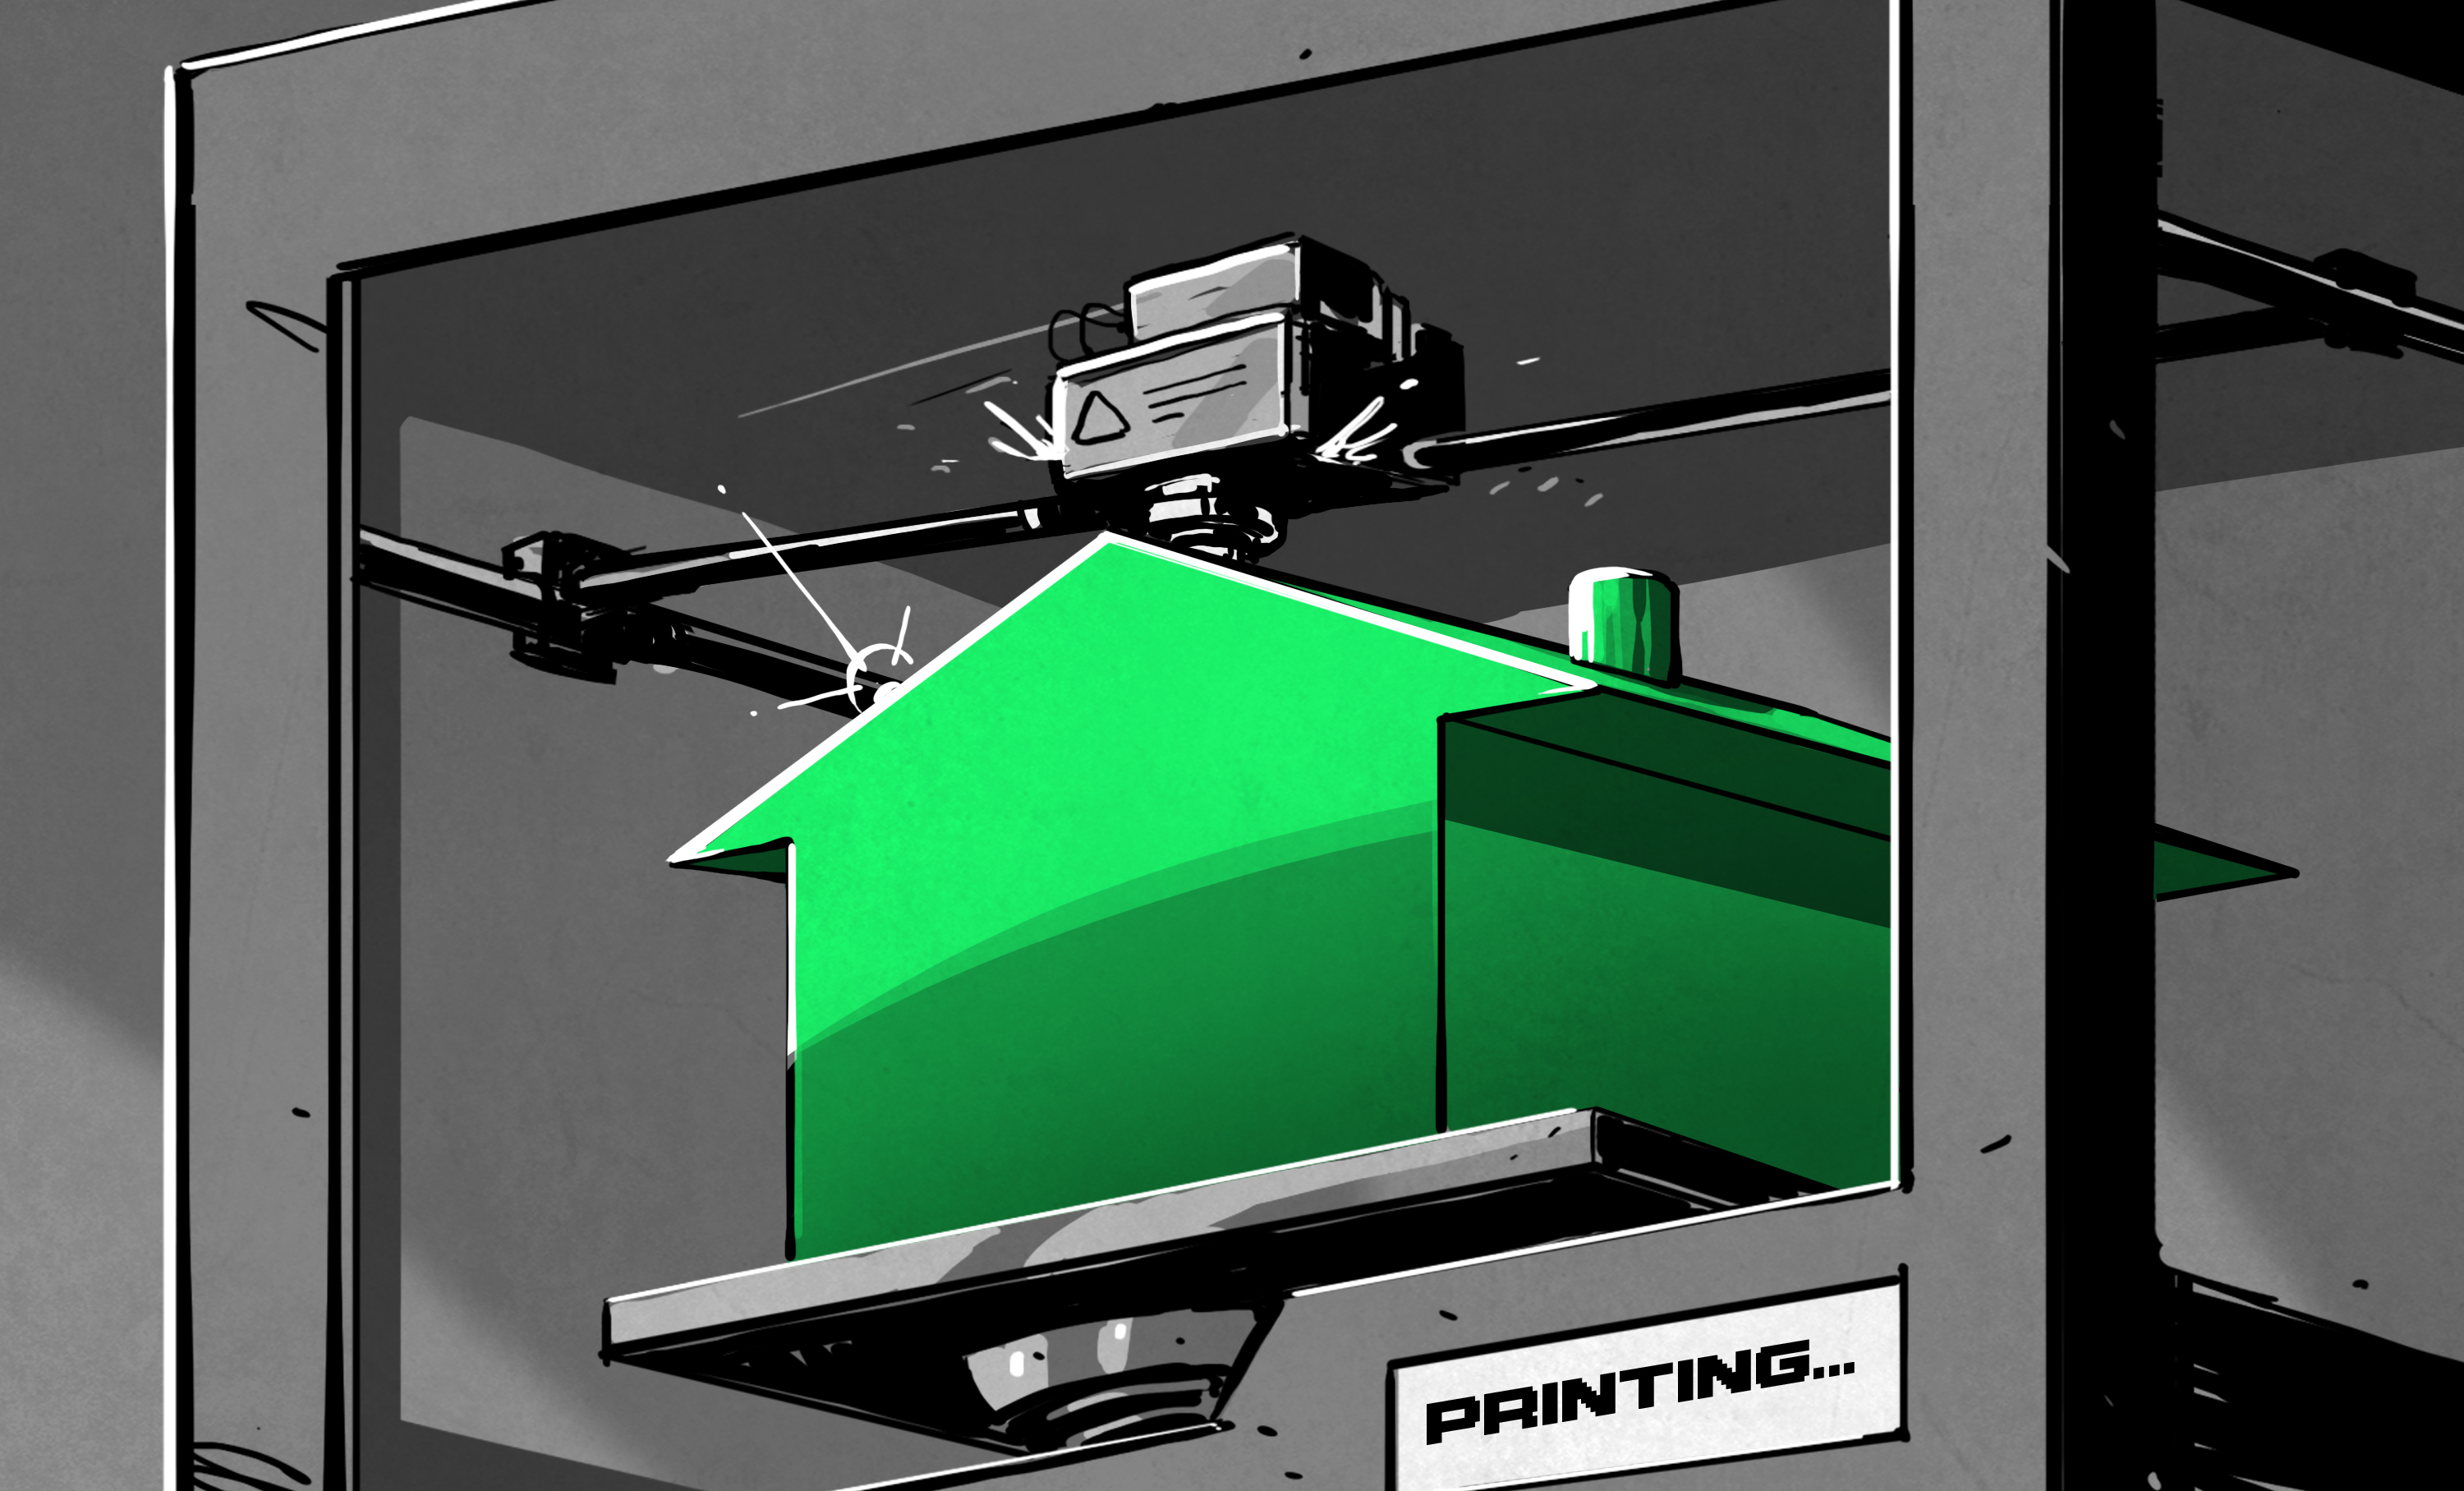 You wouldn't 3D print a house, would you?